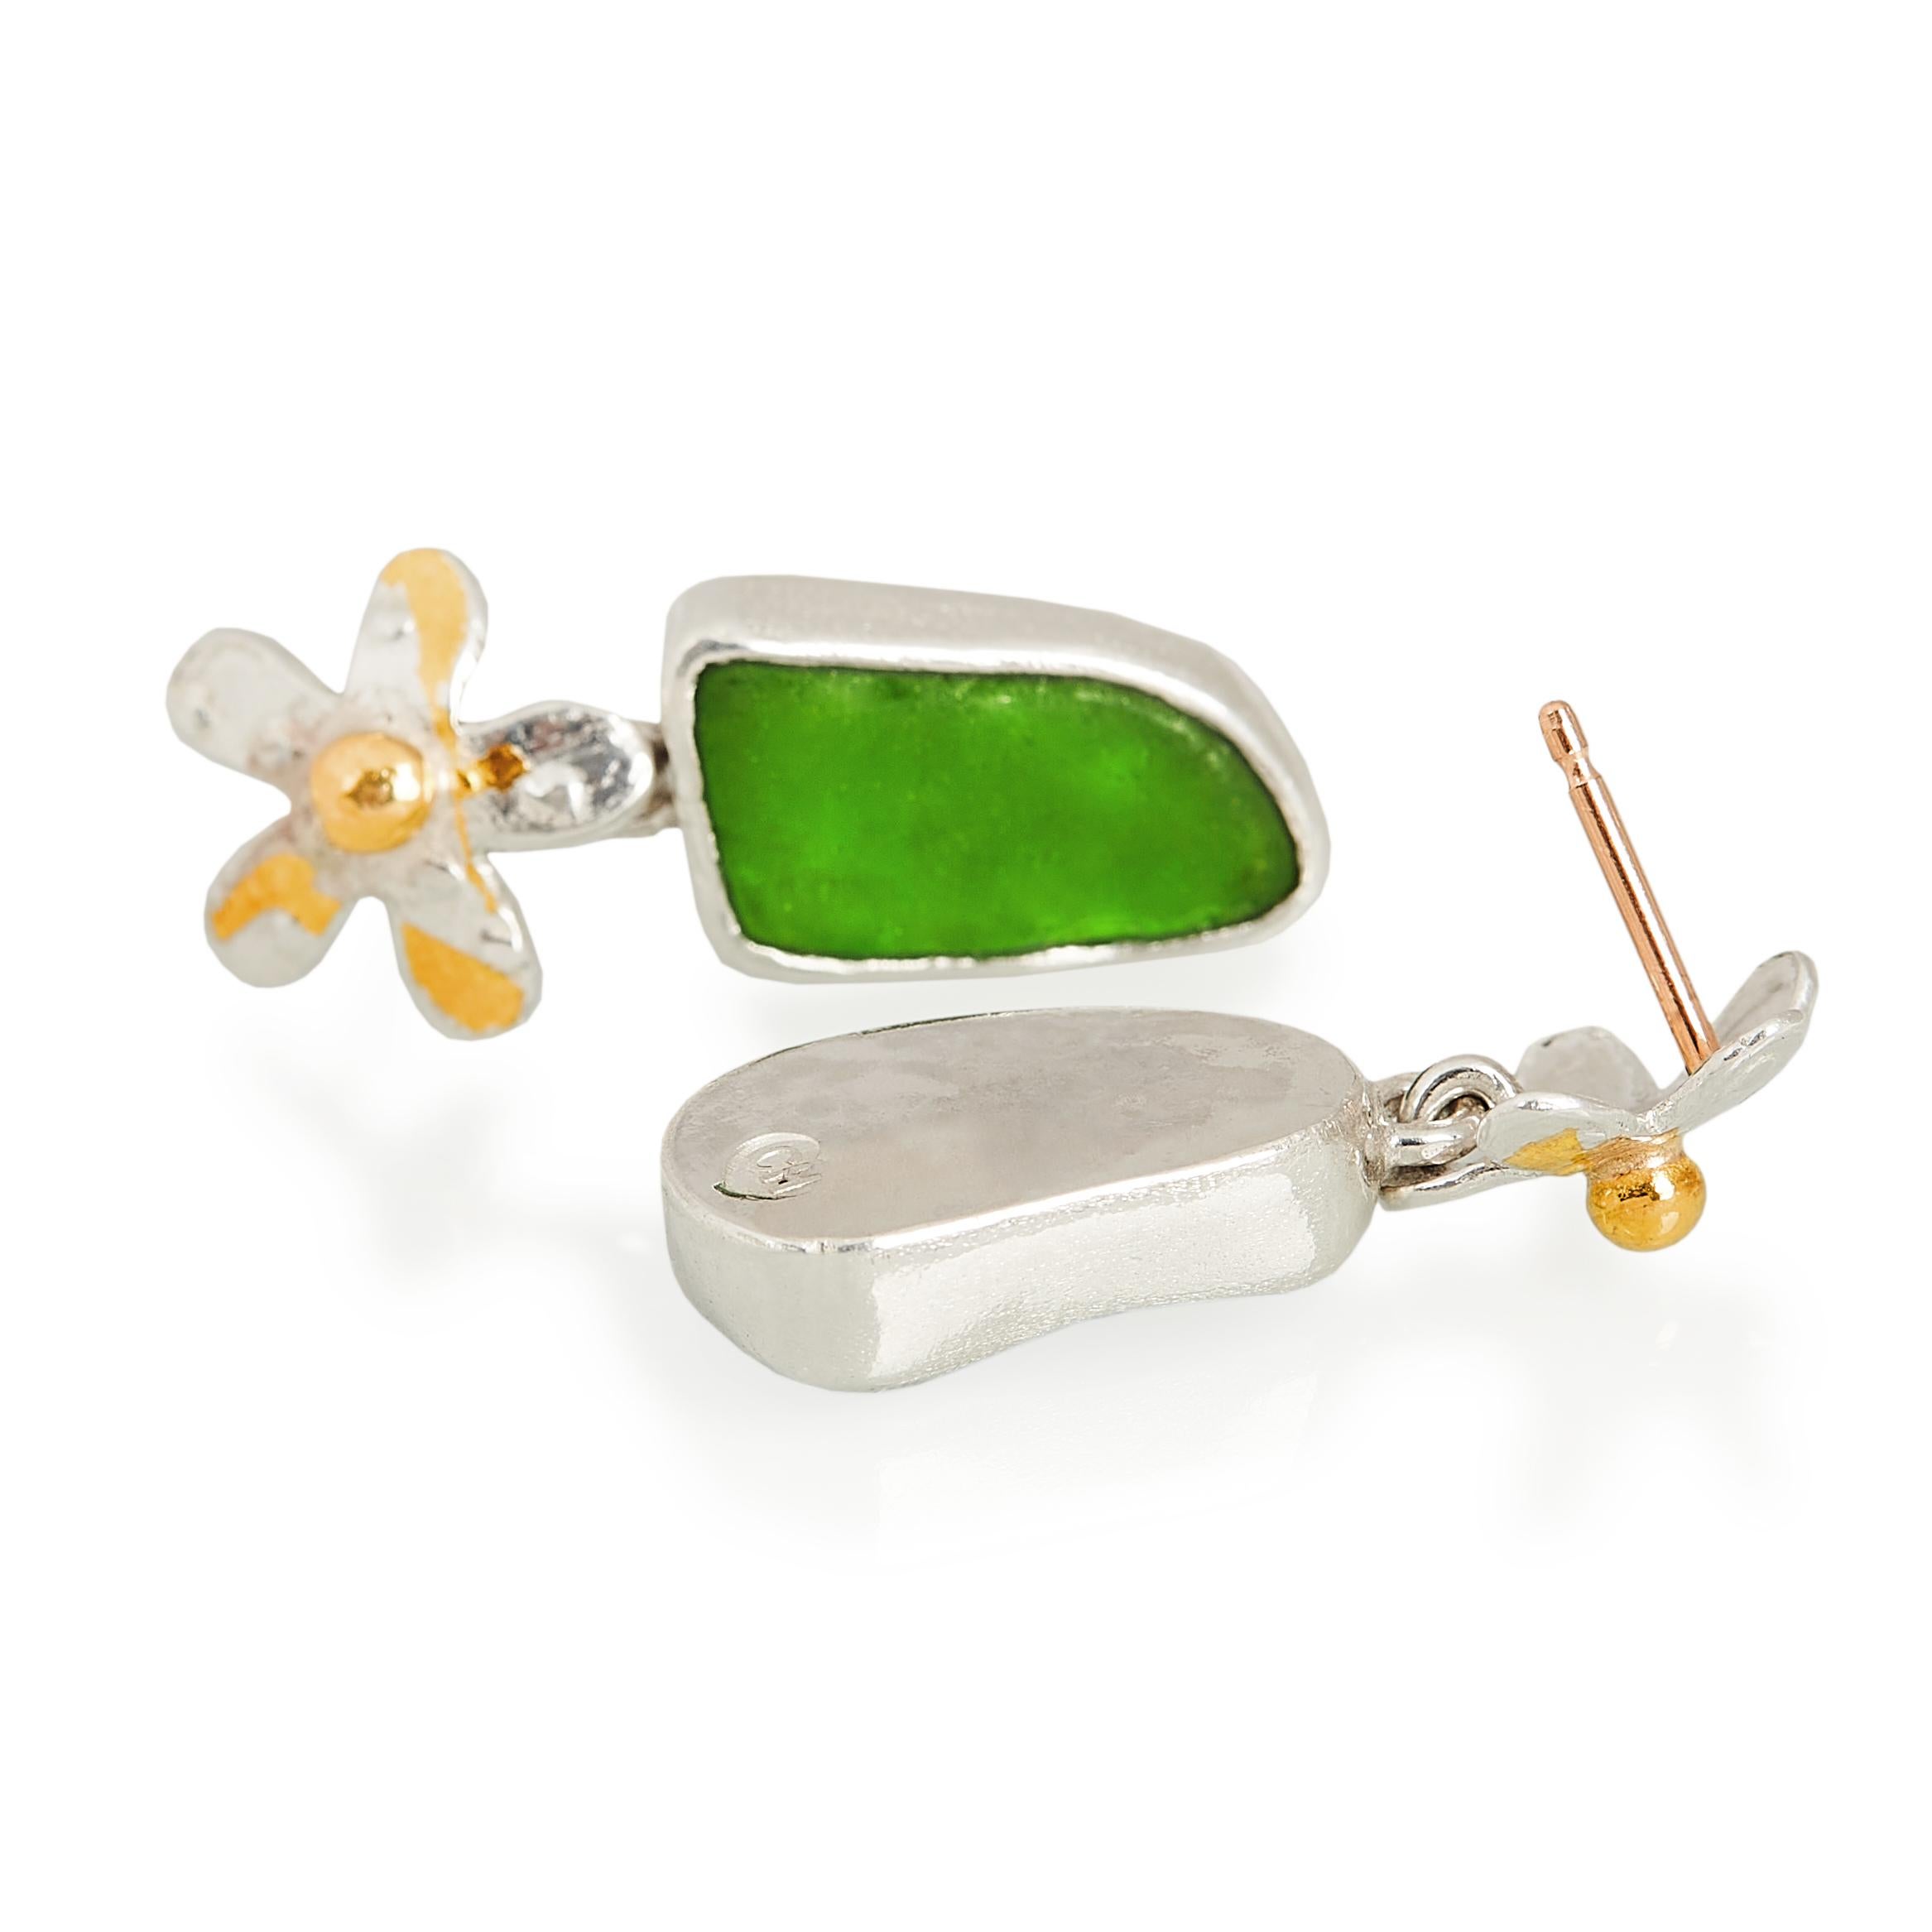 Emerald green sea glass found on the beaches of the North Cornish coast in England set in silver and suspended from daisies patterned using 24kt gold kuemboo techniques. The earring posts are made out of 9kt gold. They are handmade with care in